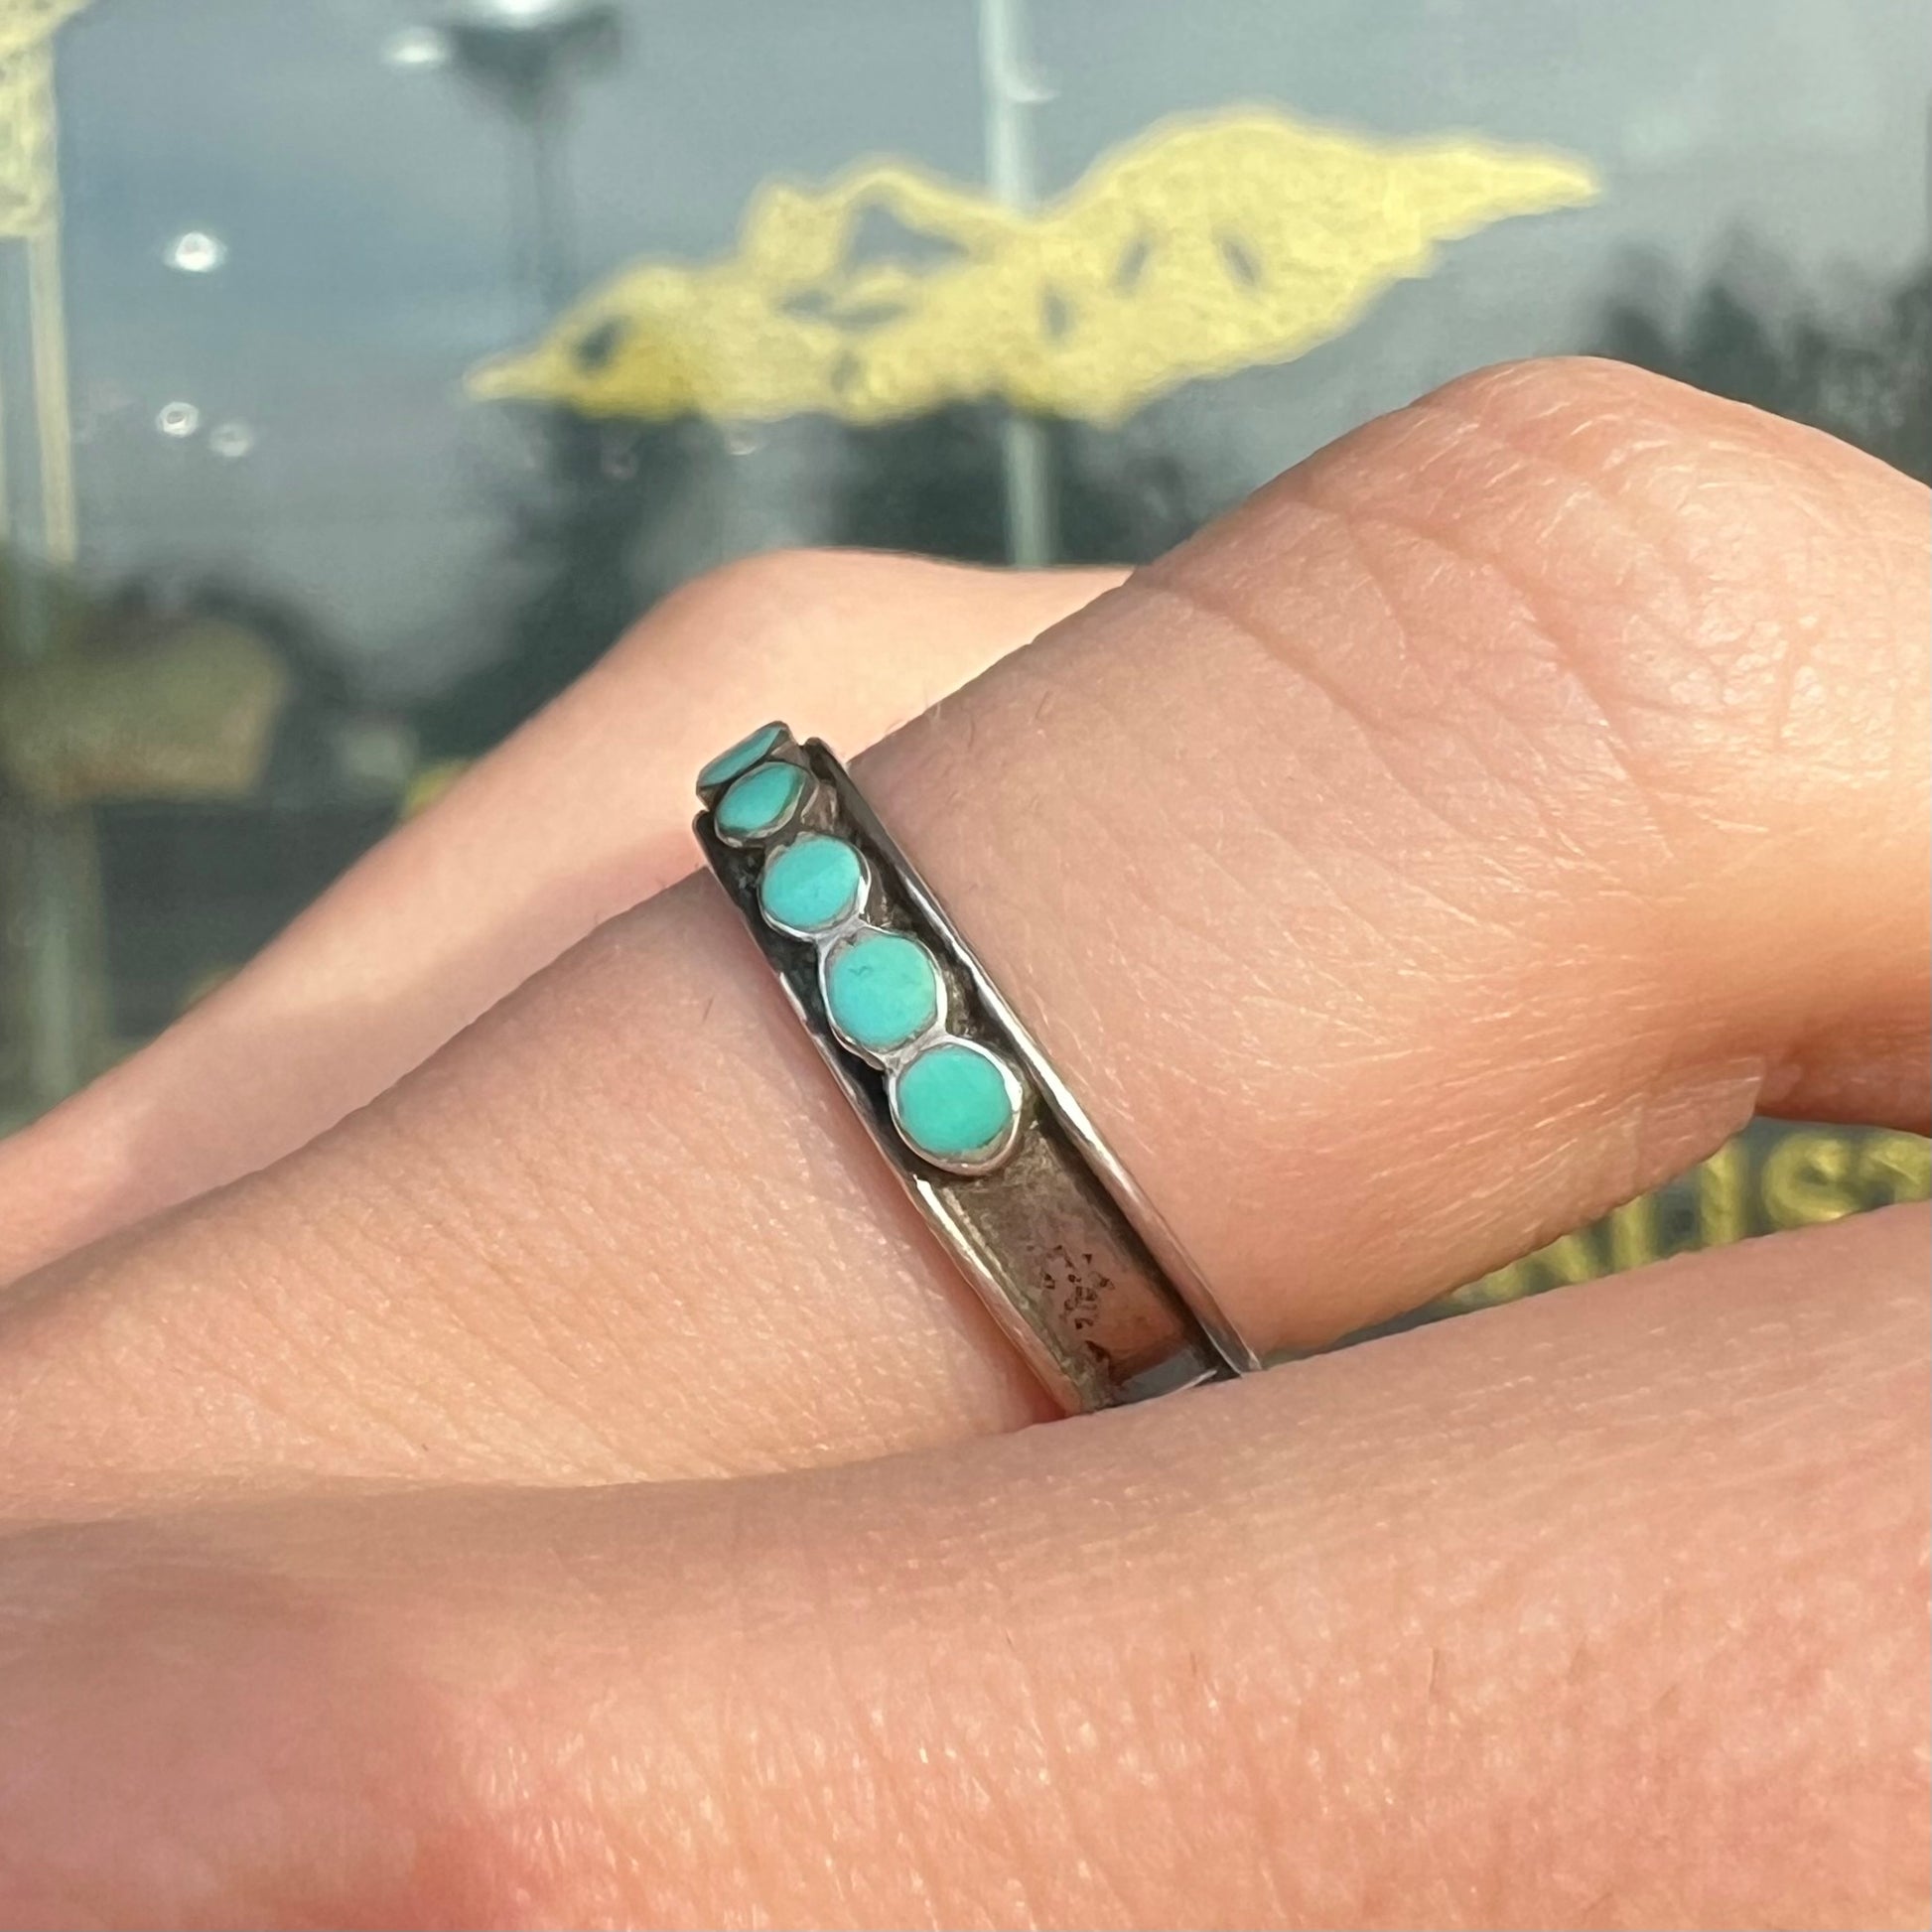 A ladies' sterling silver Hopi style band set with round cut Sleeping Beauty turquoise stones.